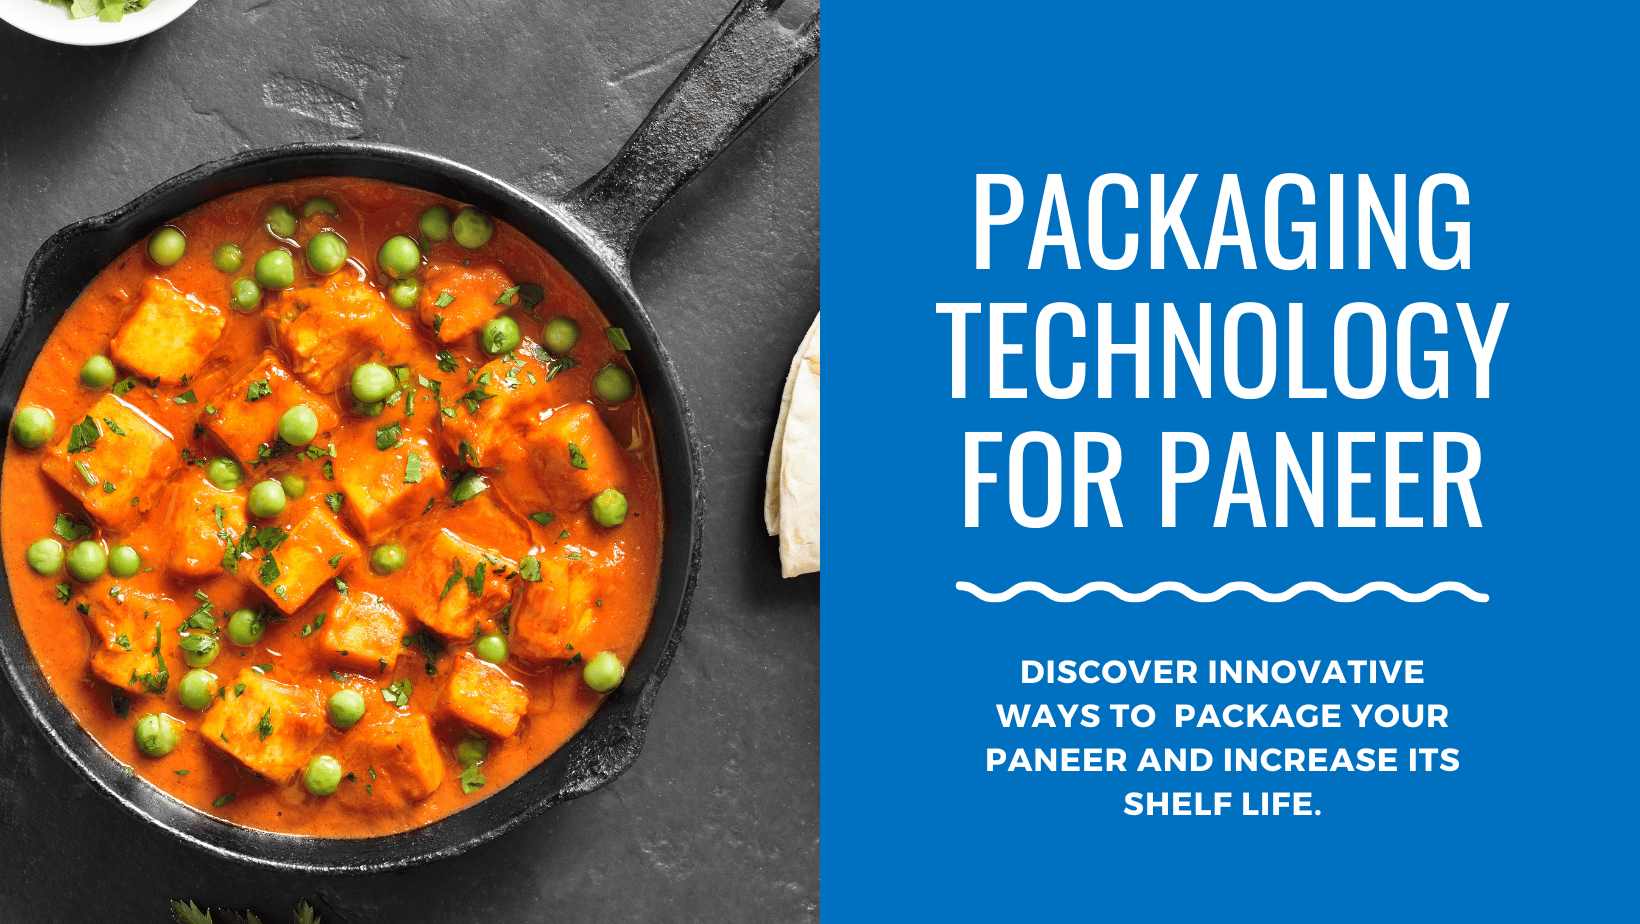 Paneer packaging technology to improve shelf life